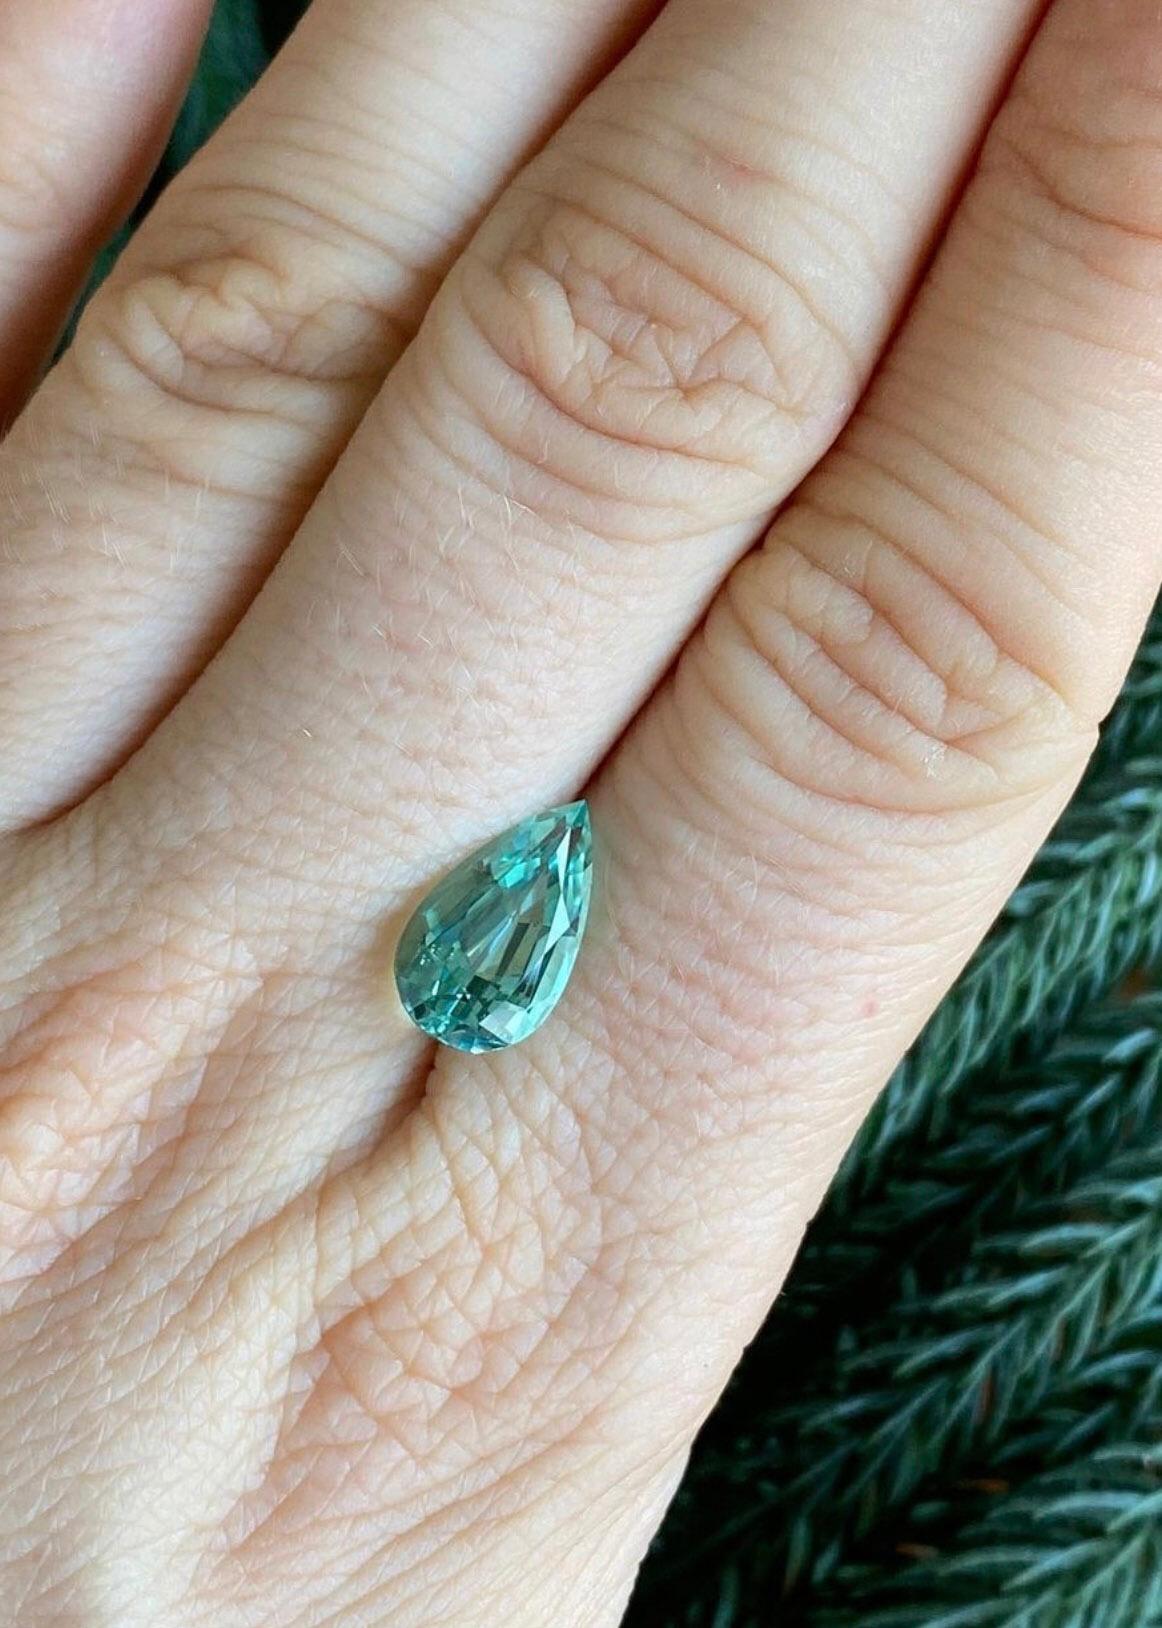 Ultra rare and exclusive 3.48 carat Paraiba Tourmaline pear shape gem offered loose to a gemstone connoisseur. 
Most Paraiba Tourmalines are significantly included. This 